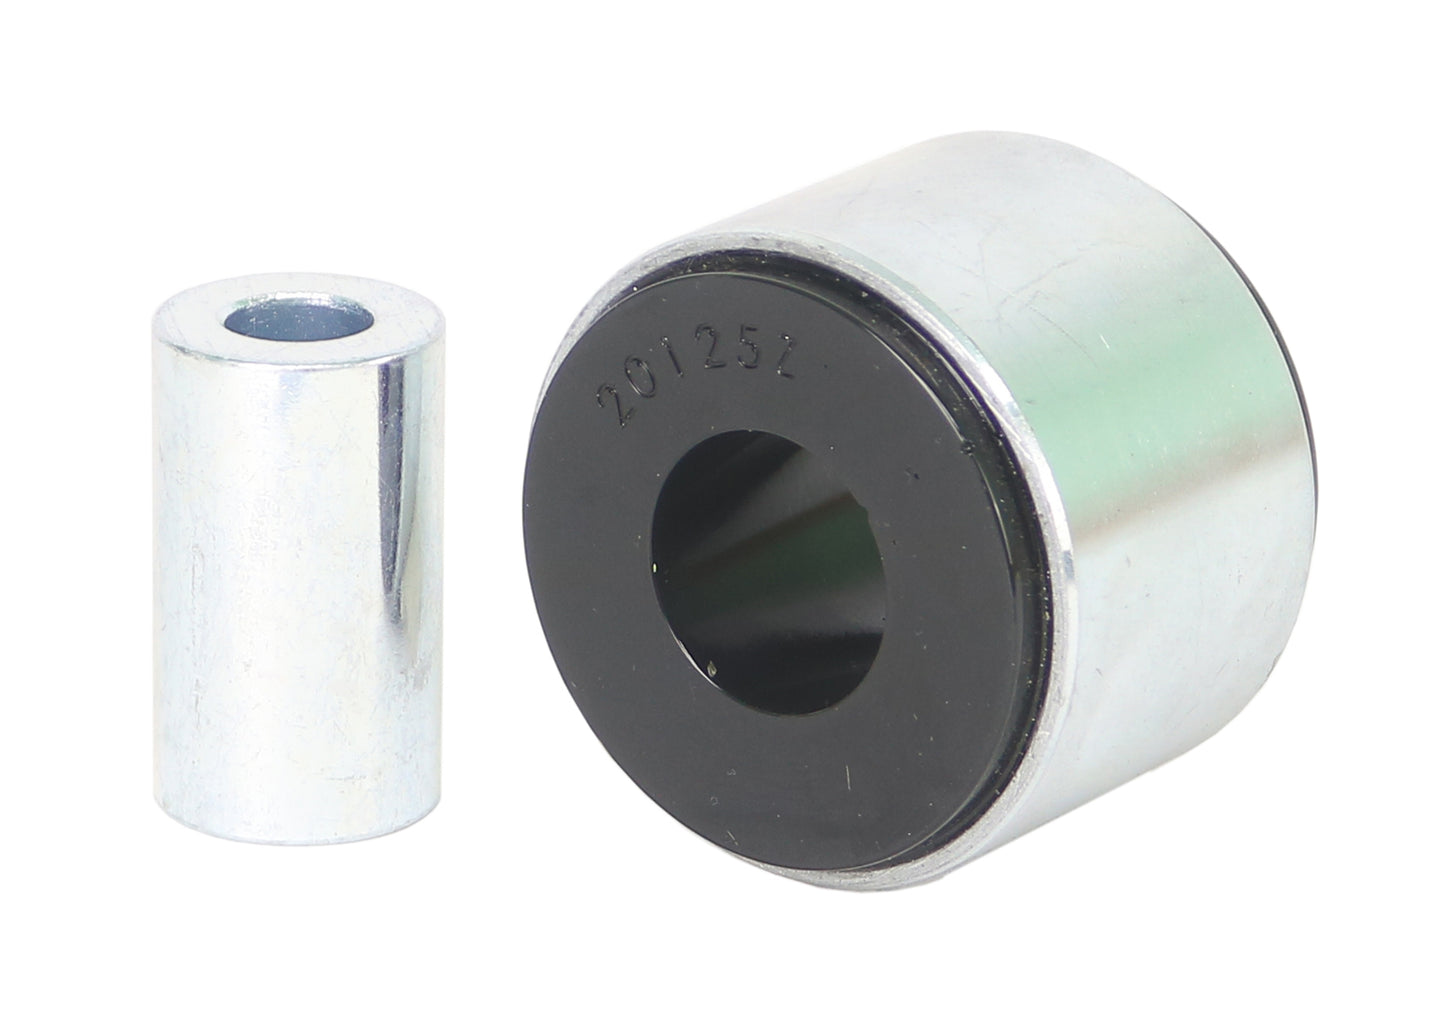 Differential Mount - Front Bushing Kit